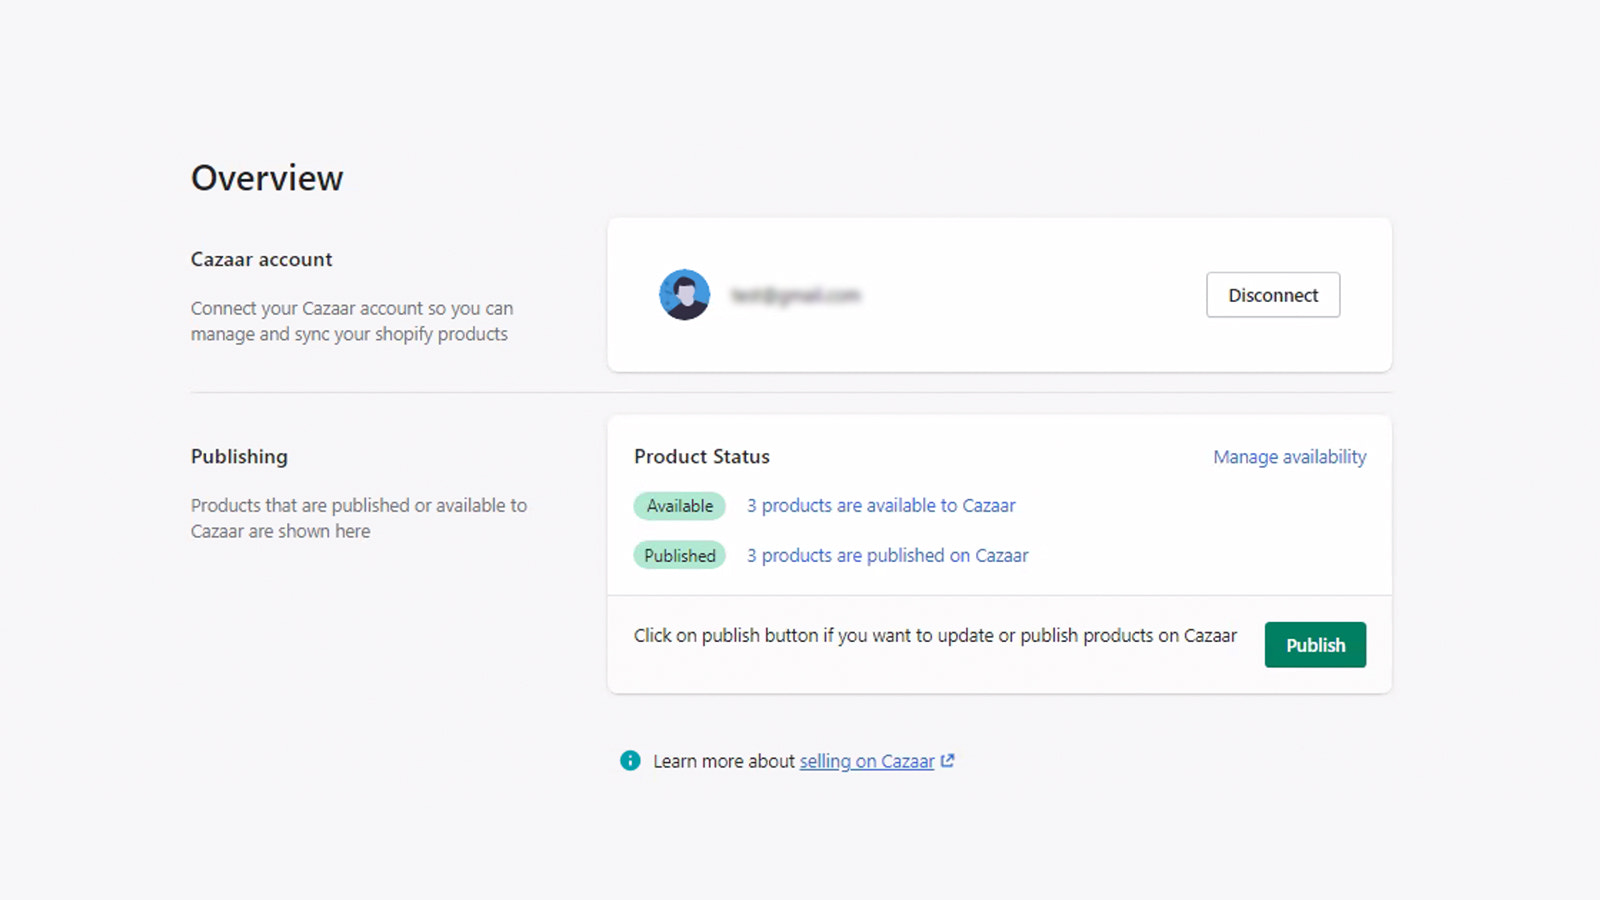 Publish products on Cazaar